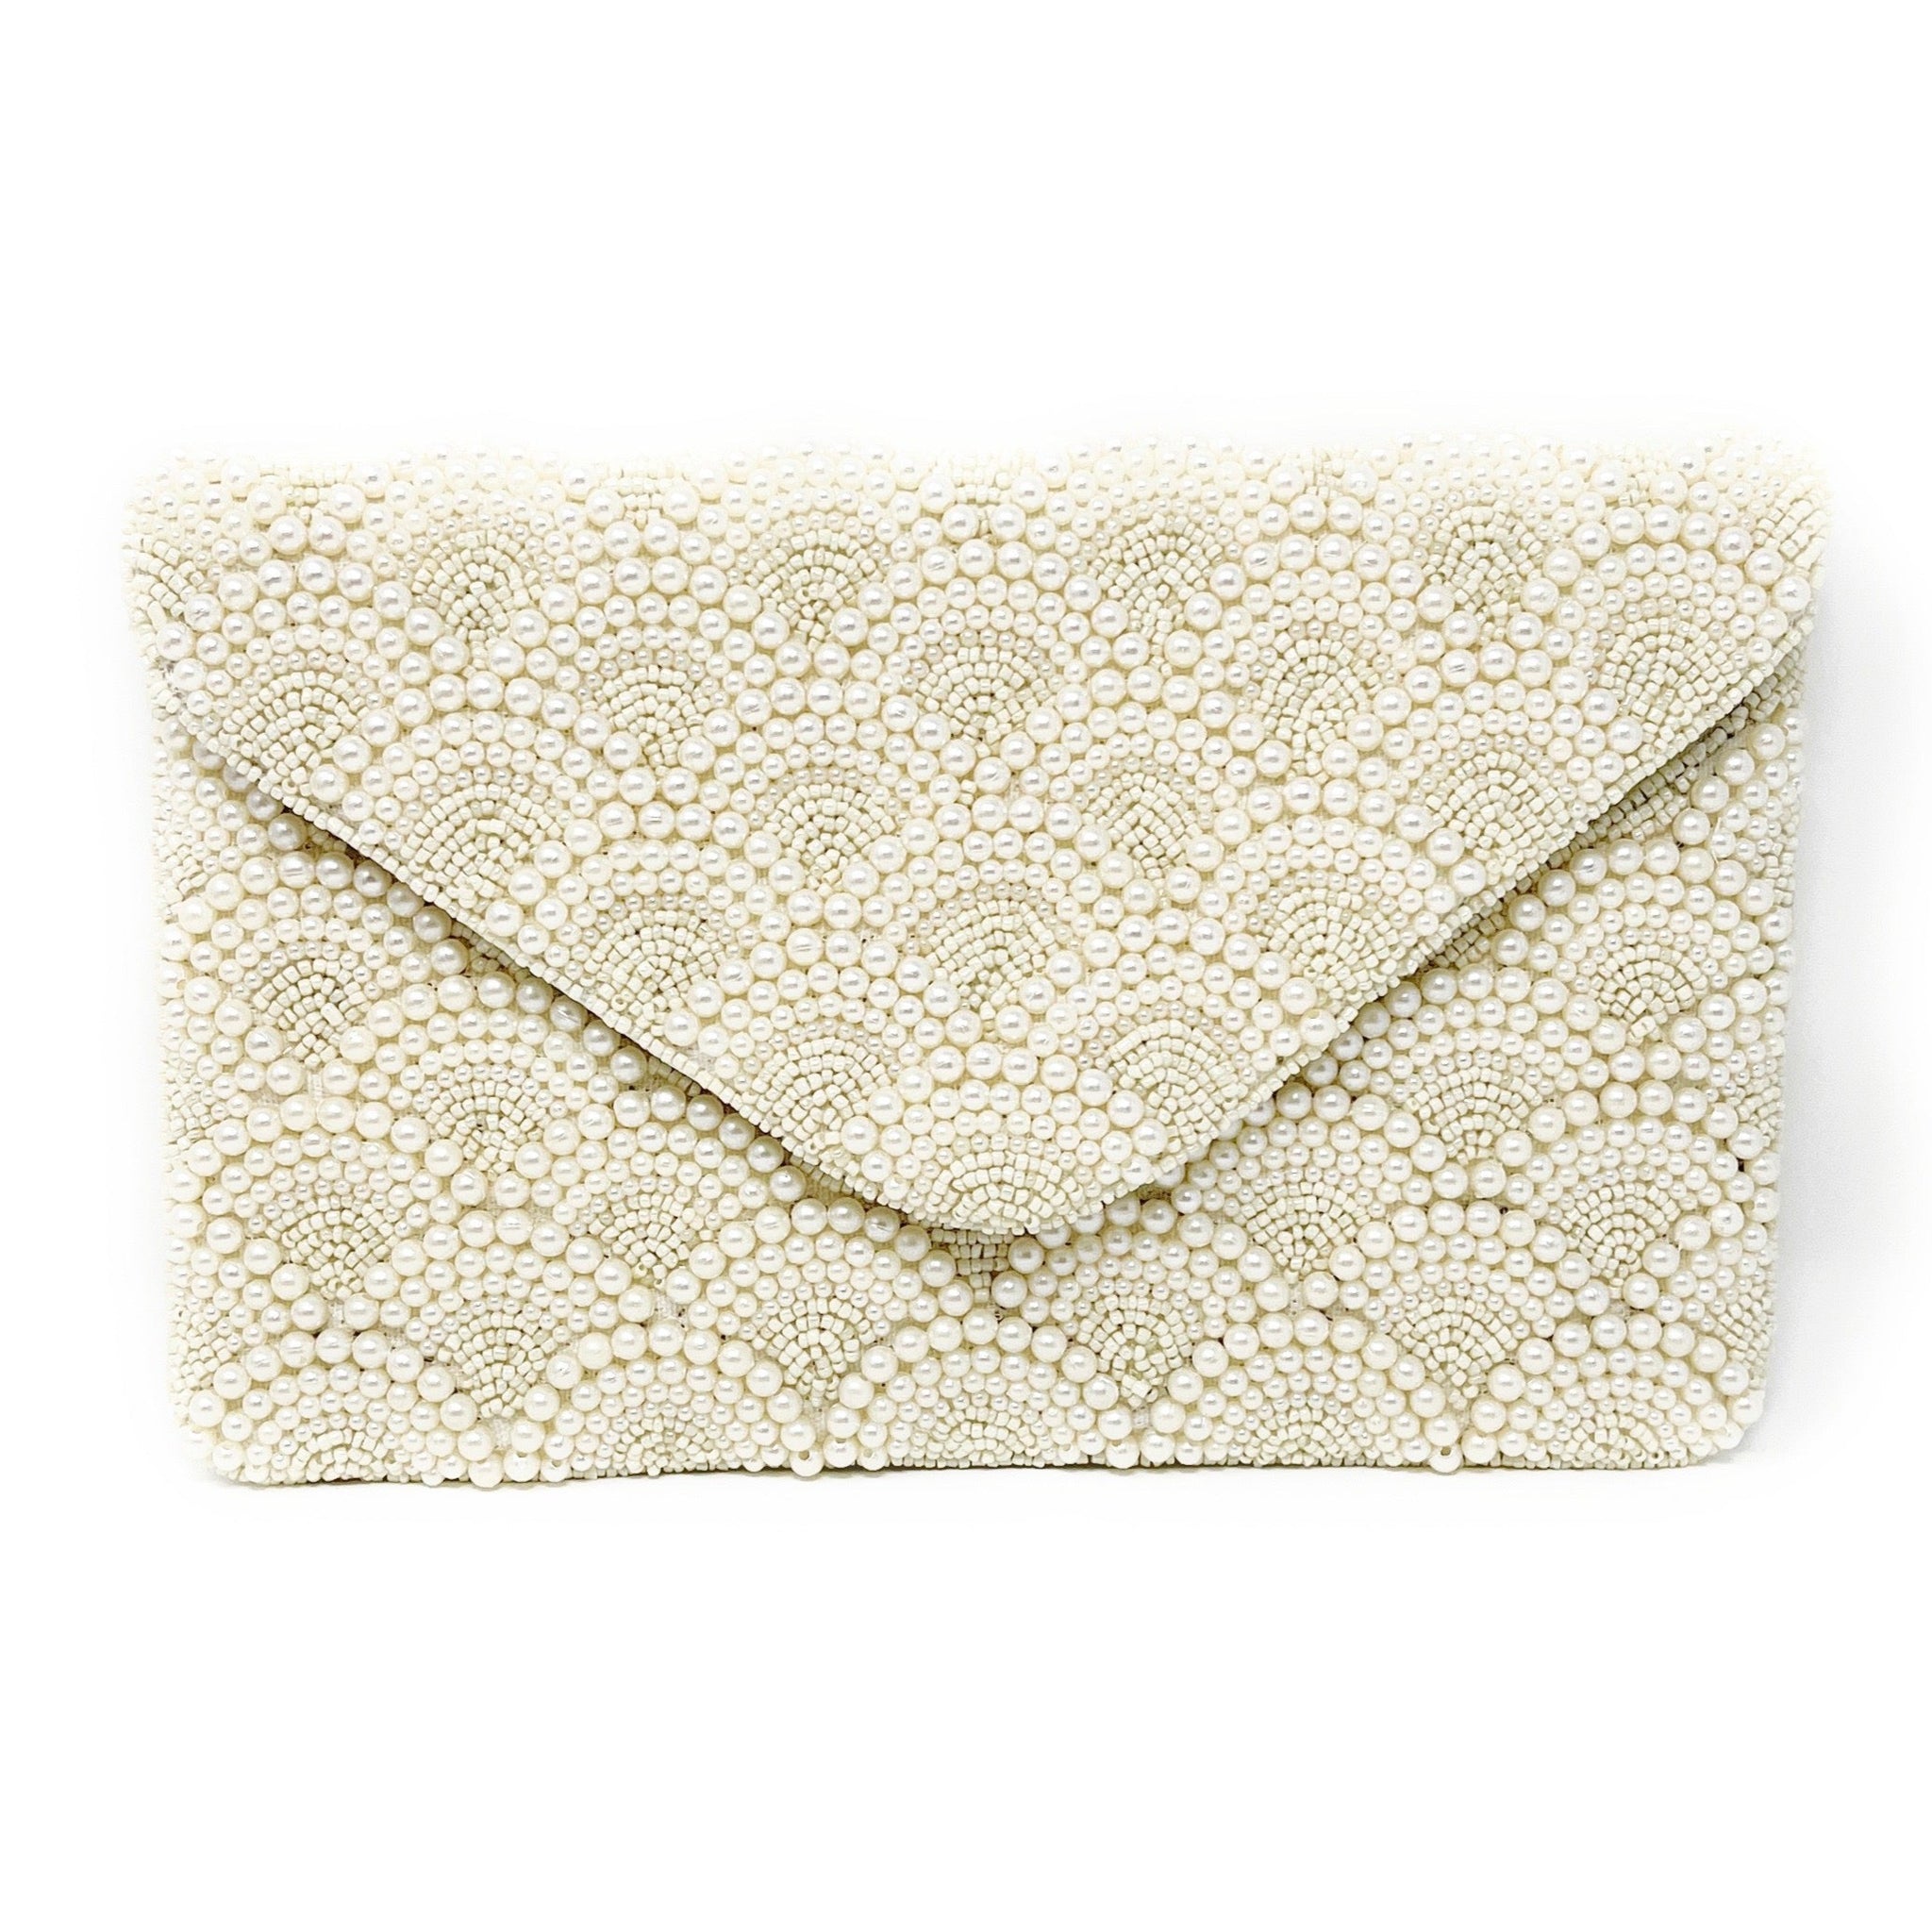 Elegant Ivory satin bag purse with pearls for your wedding – Bridal Spain